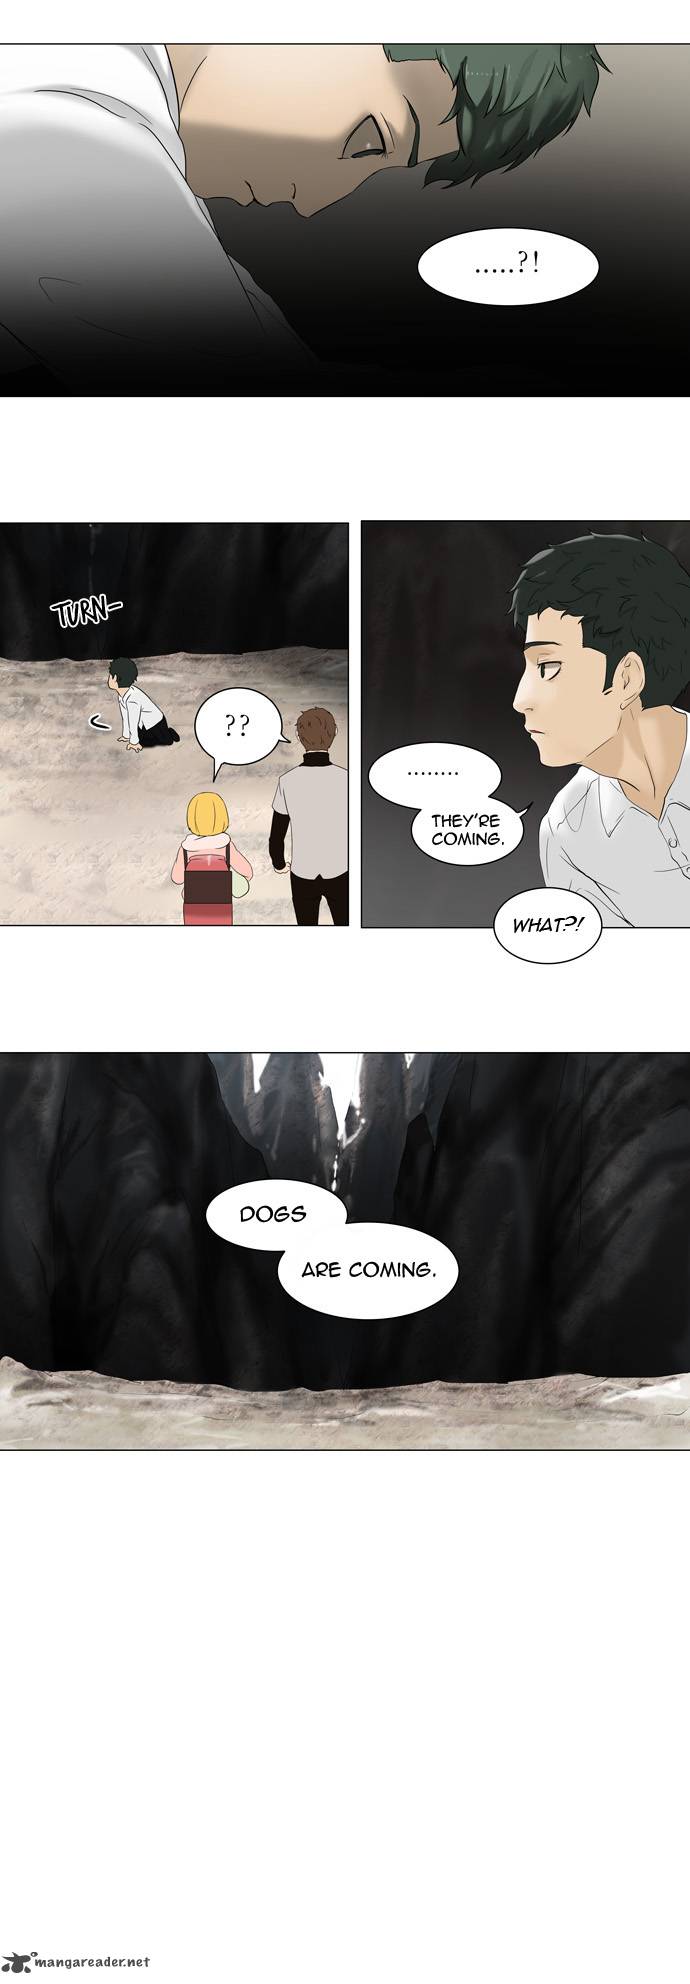 Tower Of God 66 5